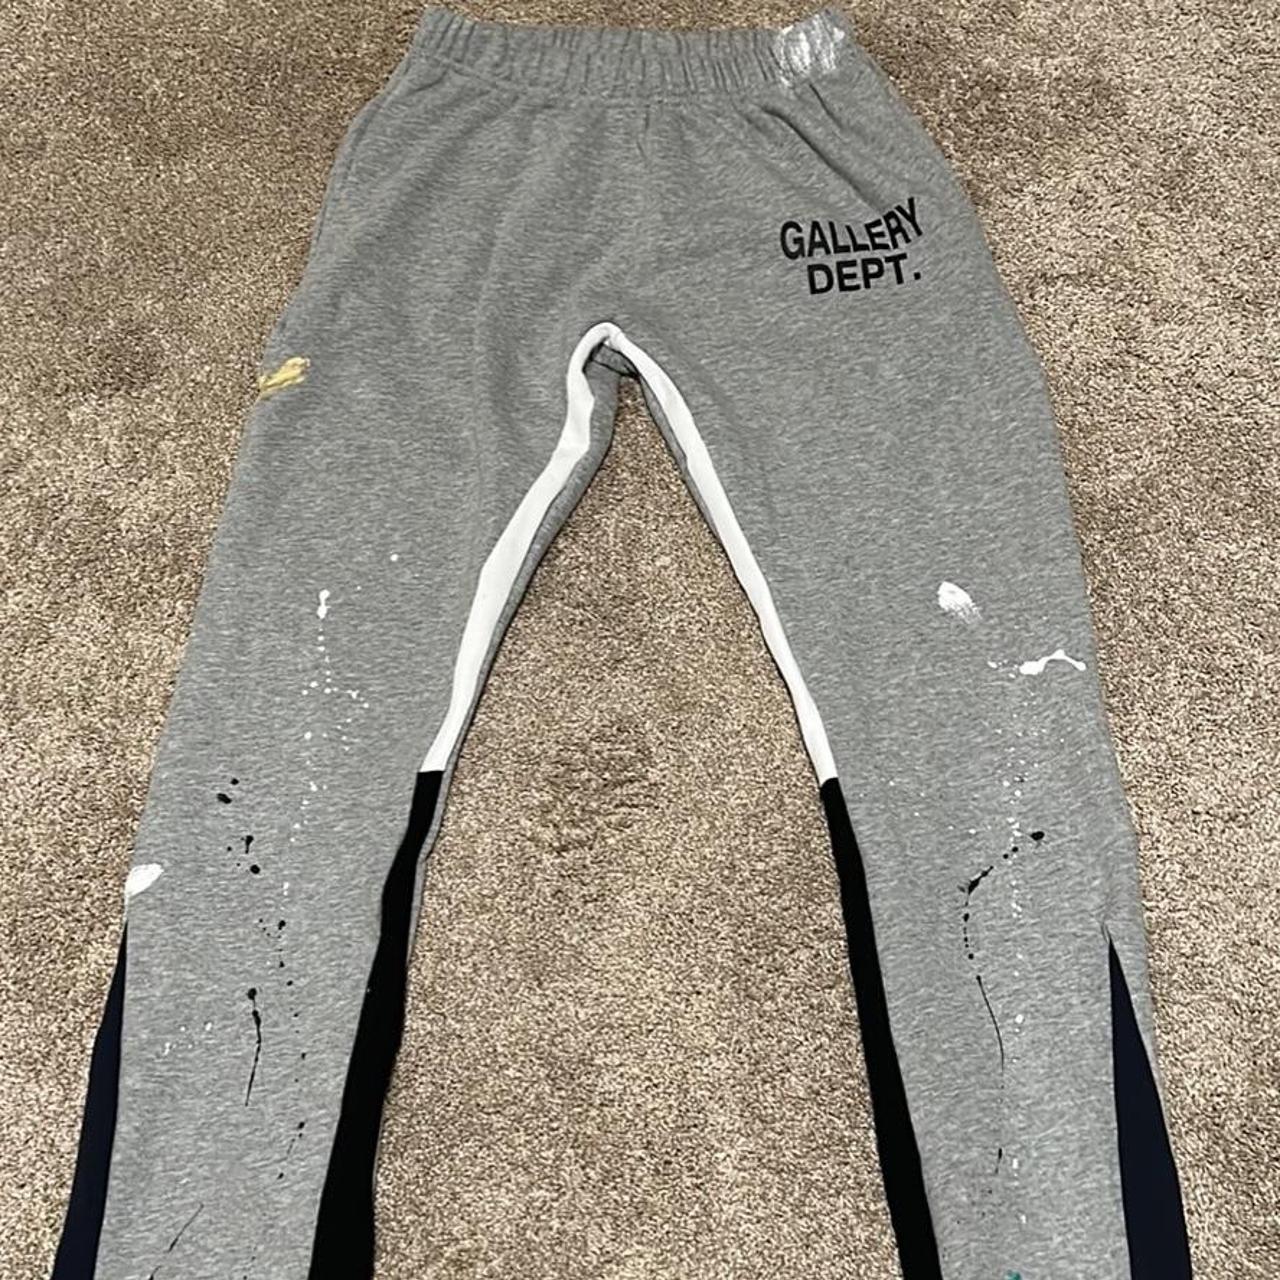 Gallery Dept. Painted Flare Sweatpant 'Grey